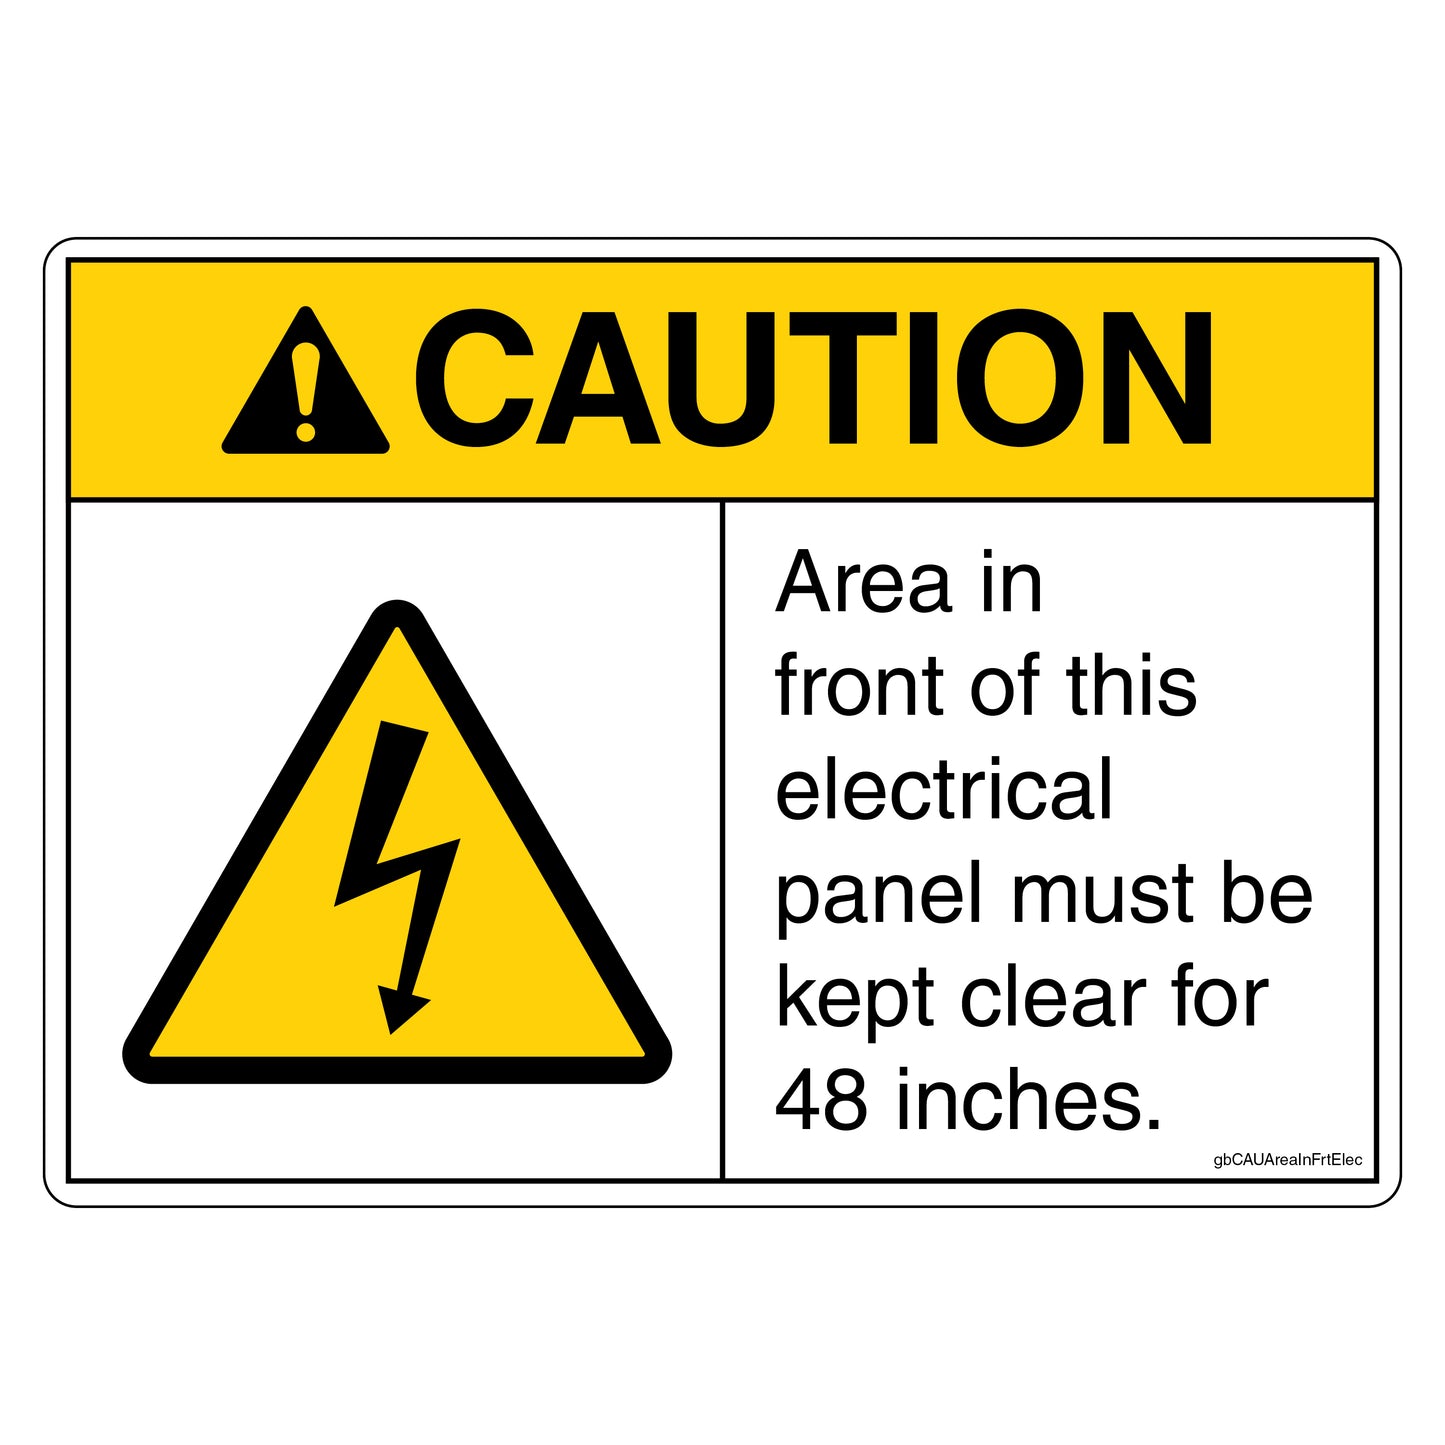 Caution Area in Front of Electrical Panel Must Be Kept Clear for 48 inches Decal. 4 inches by 3 inches in size.